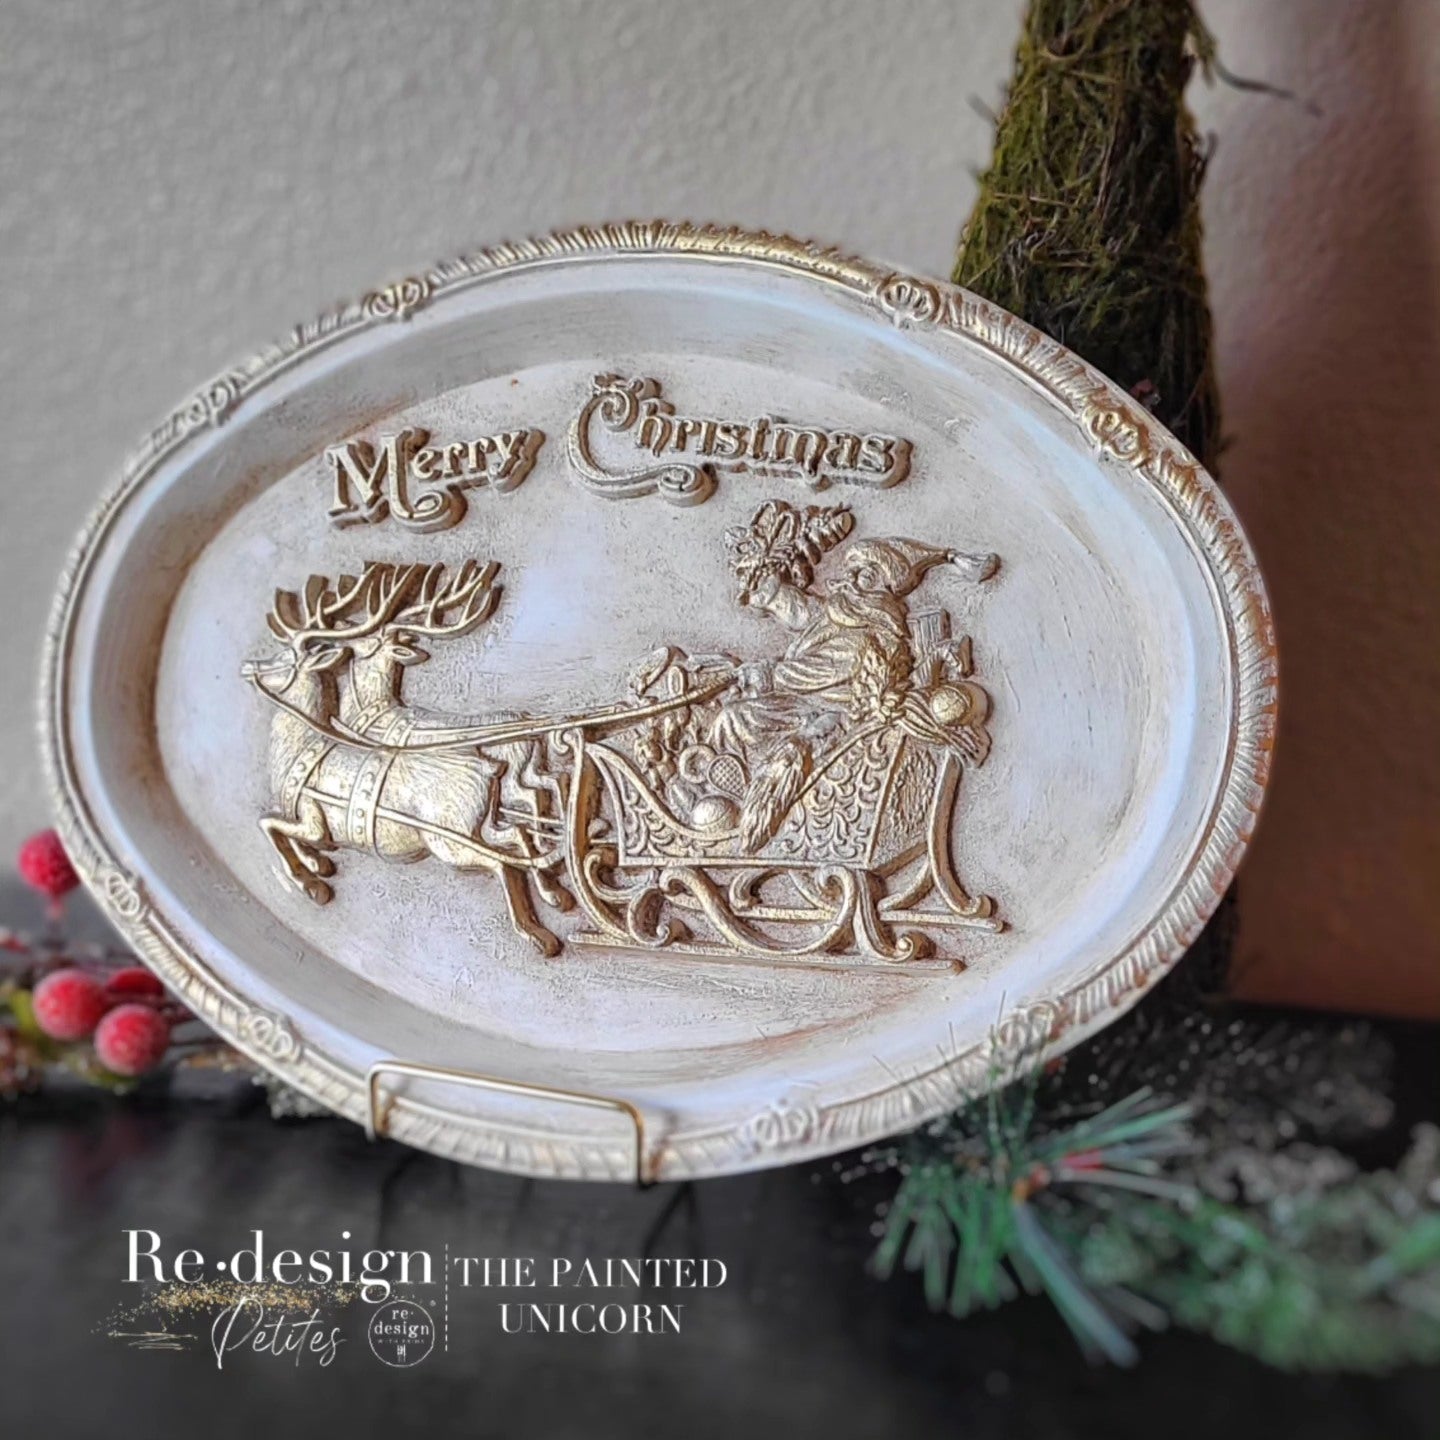 NEW - Redesign Decor Moulds - Santa's Sleigh